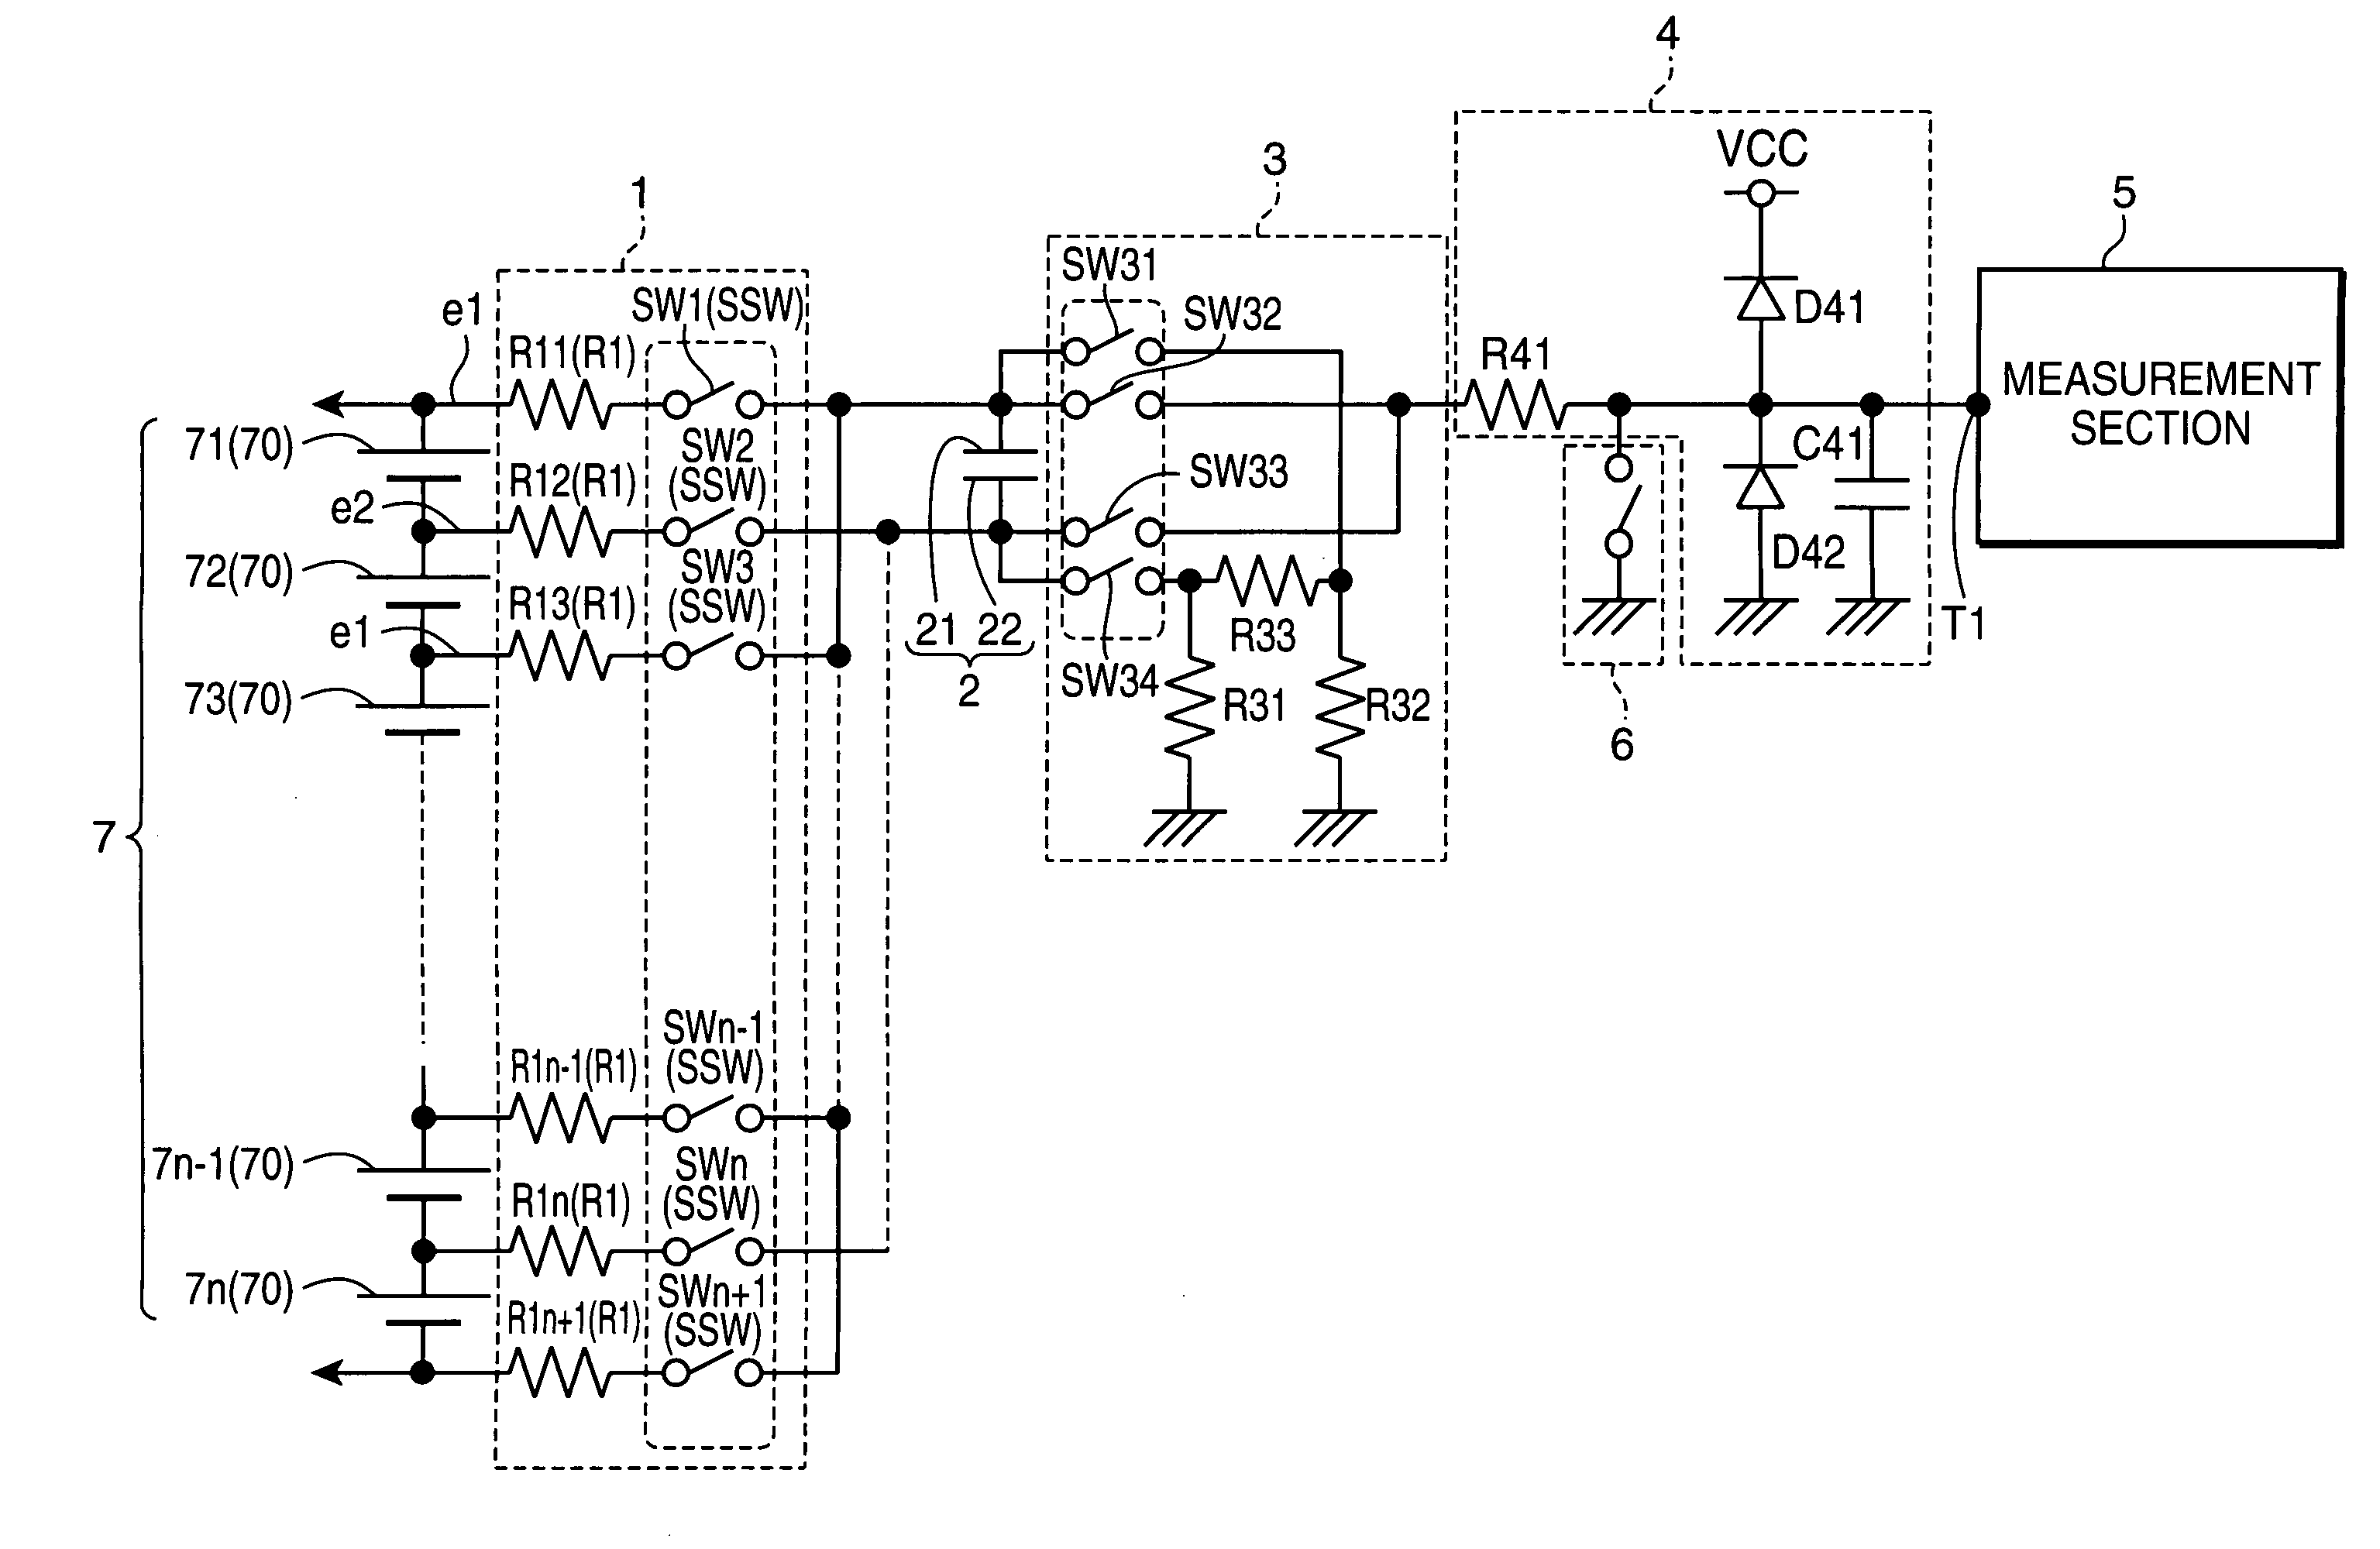 Voltage measurement apparatus and electrically-driven tool